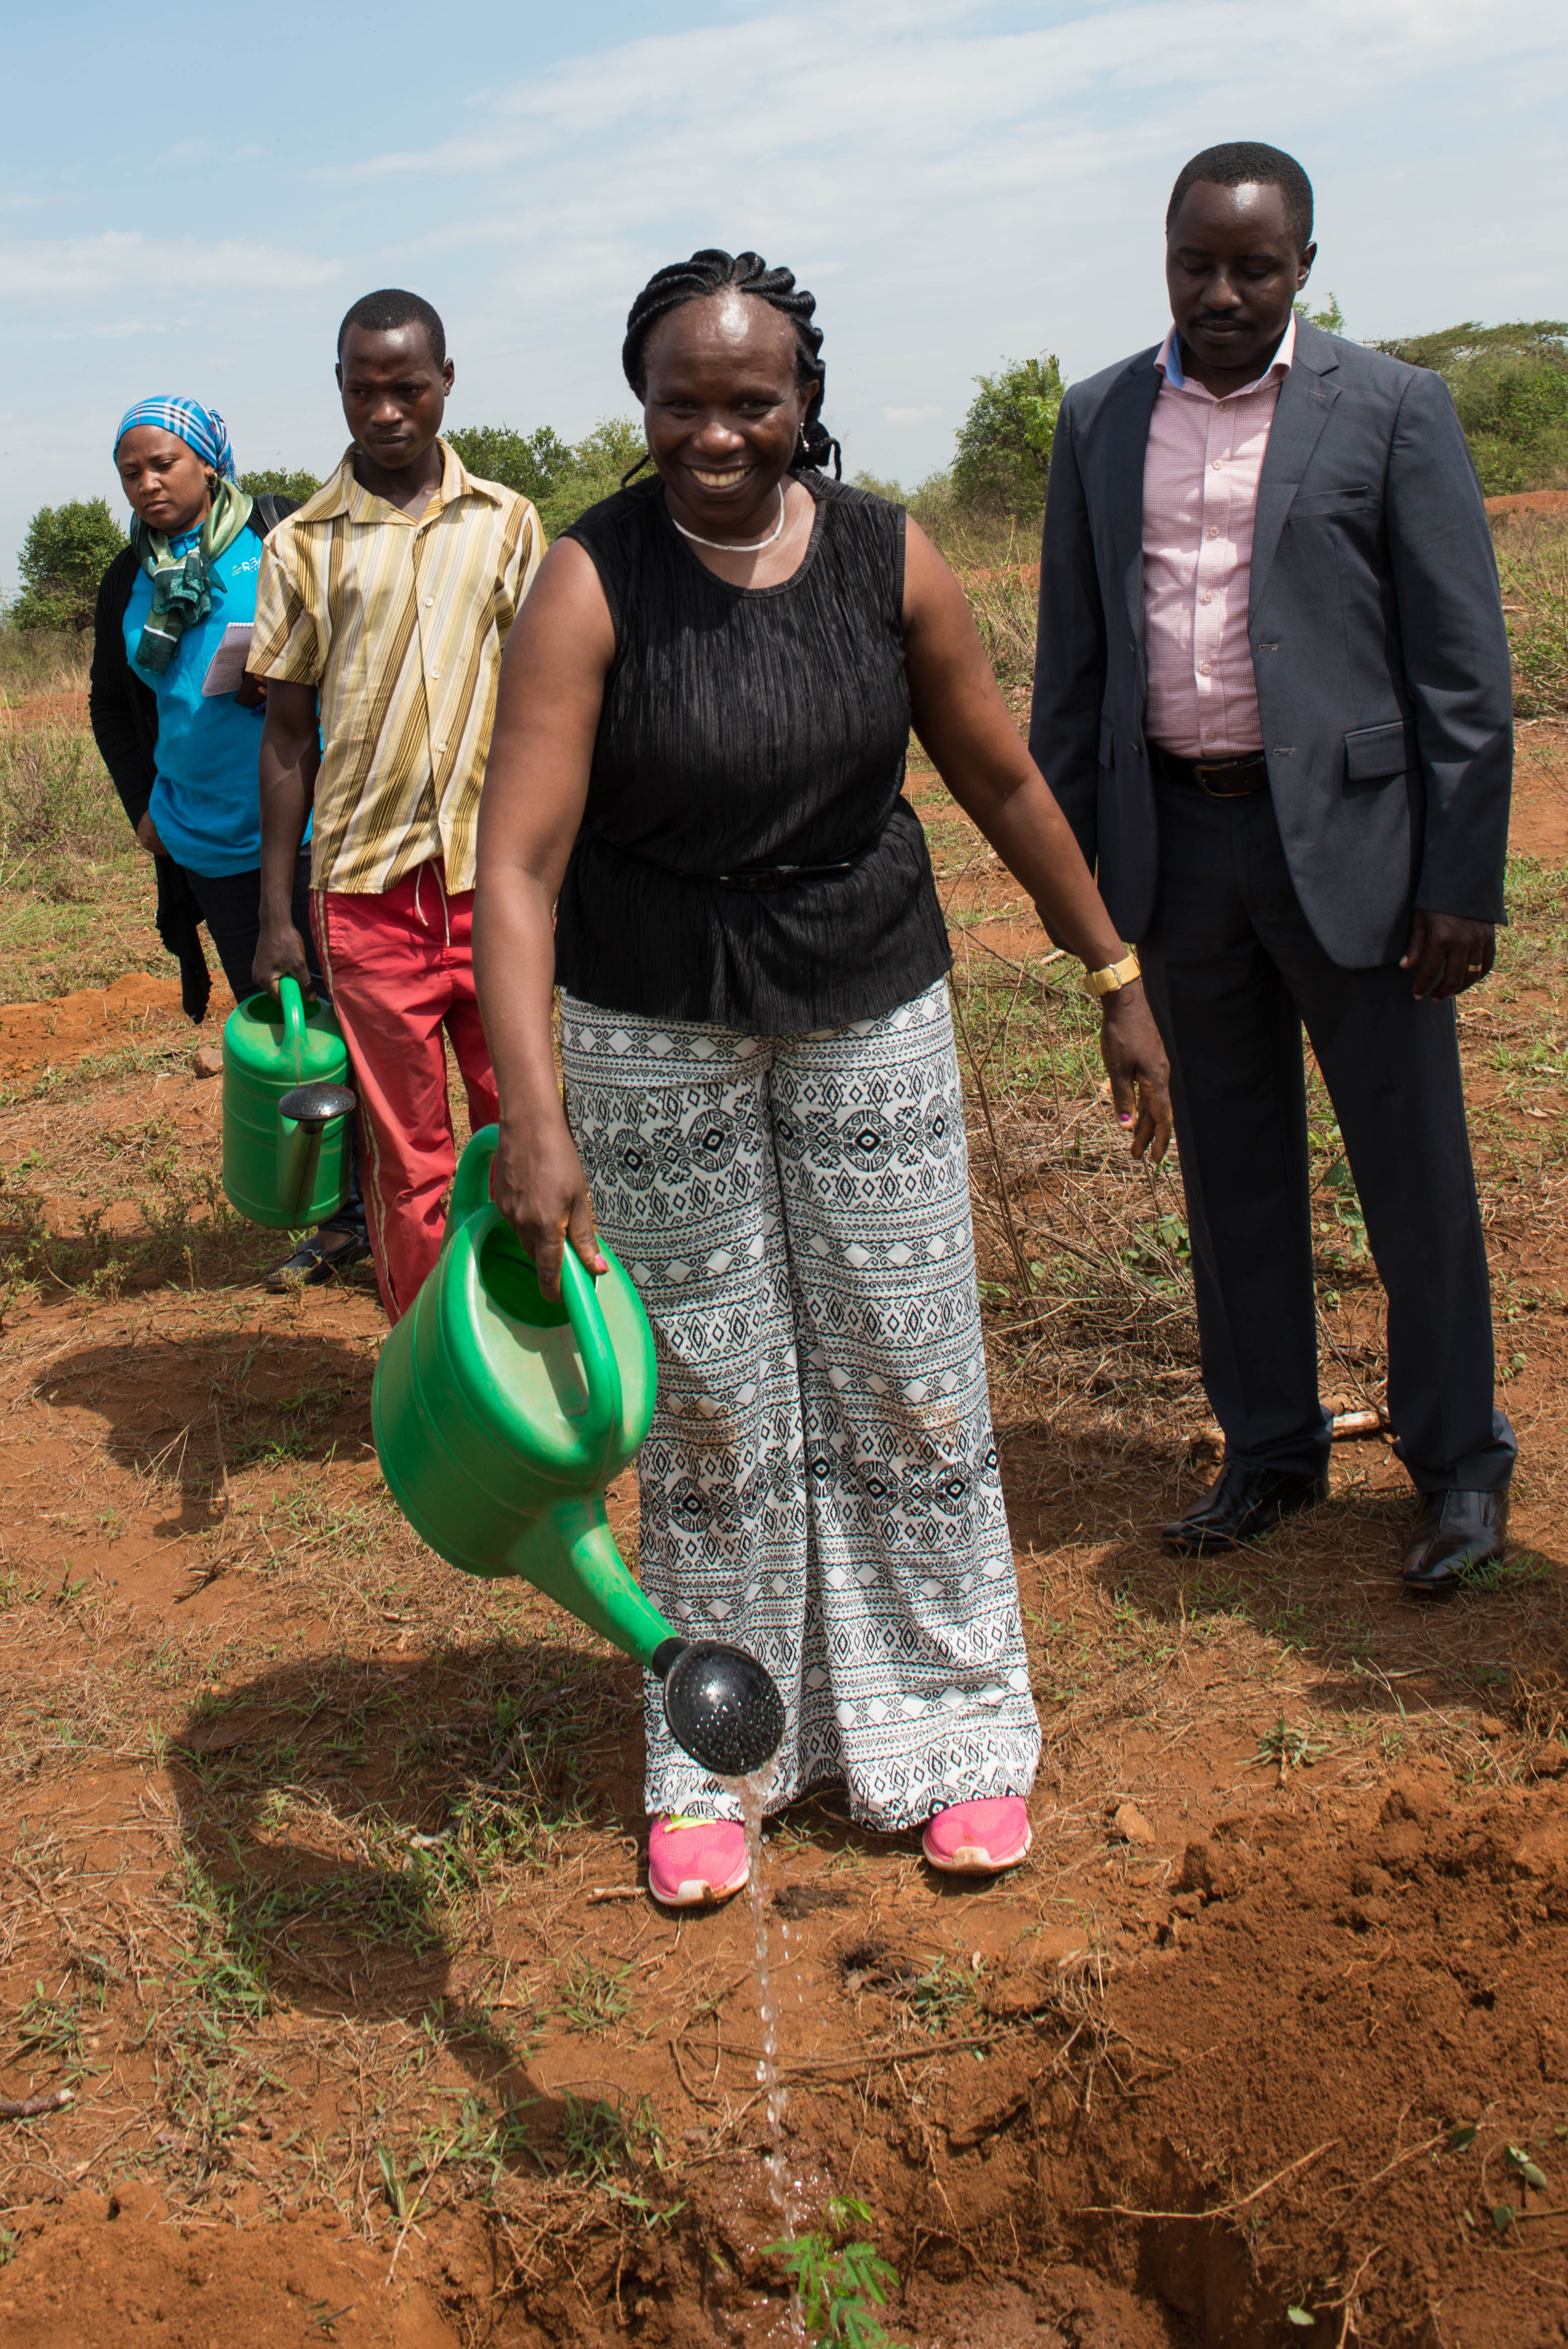 Catherine Muthuri, ICRAF Regional Coordinator for Eastern and Southern Africa Region and Trees for Food Security Project Manager, watering a tree during a field visit.